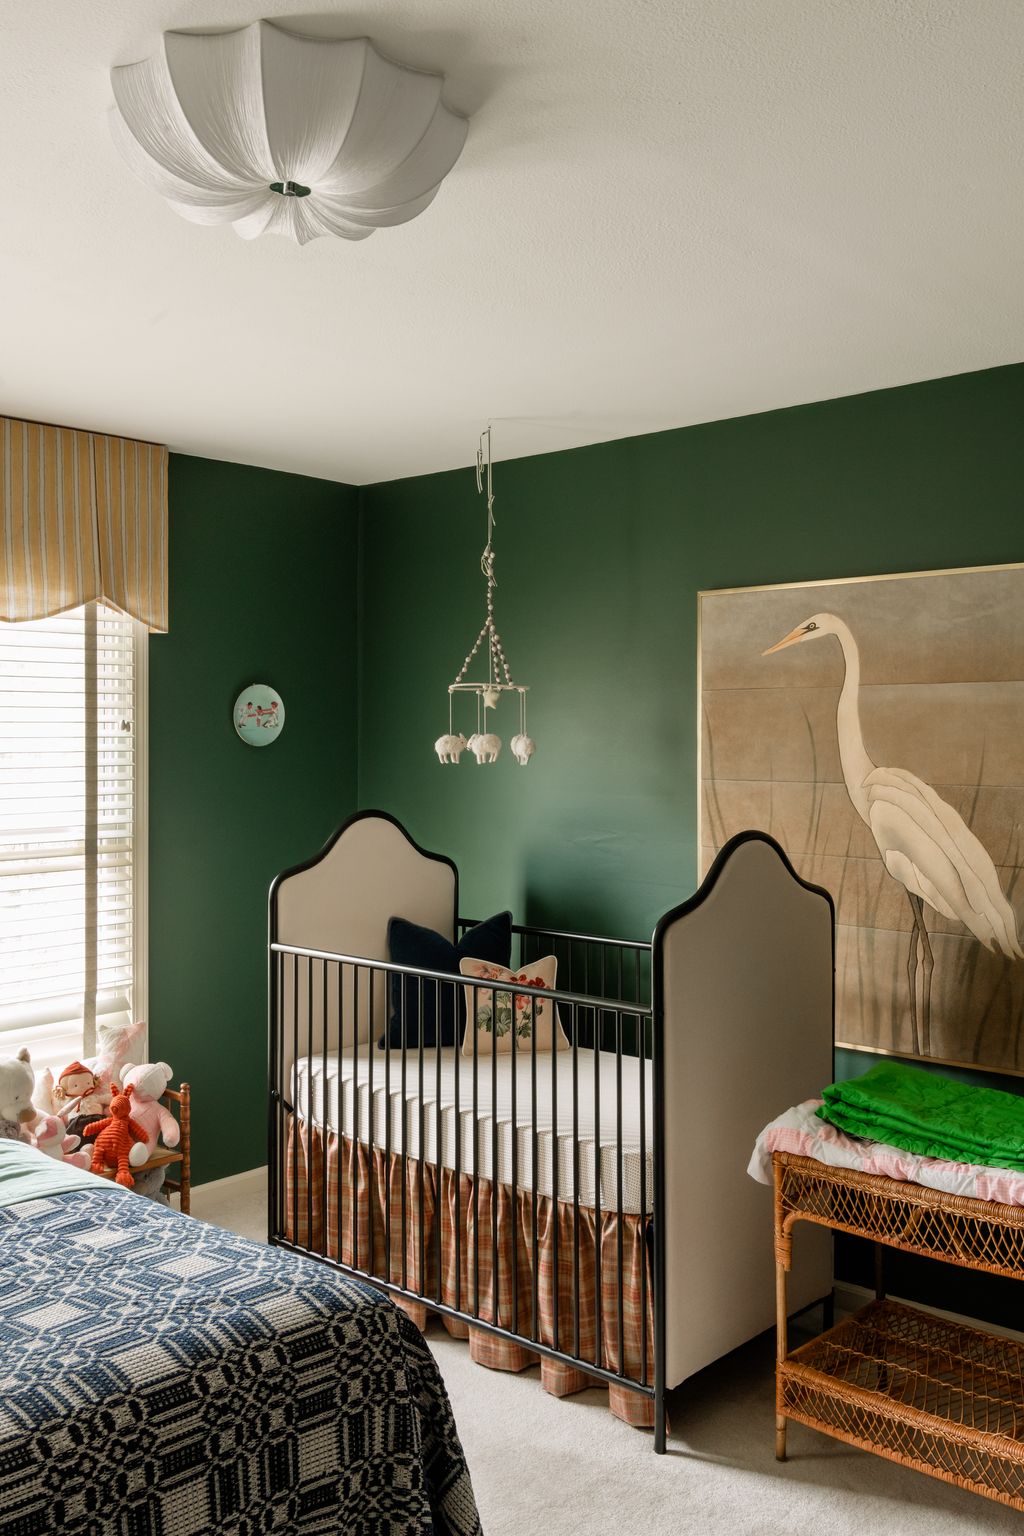 Gender neutral nursery ideas: 19 ways to decorate to suit a girl or a boy